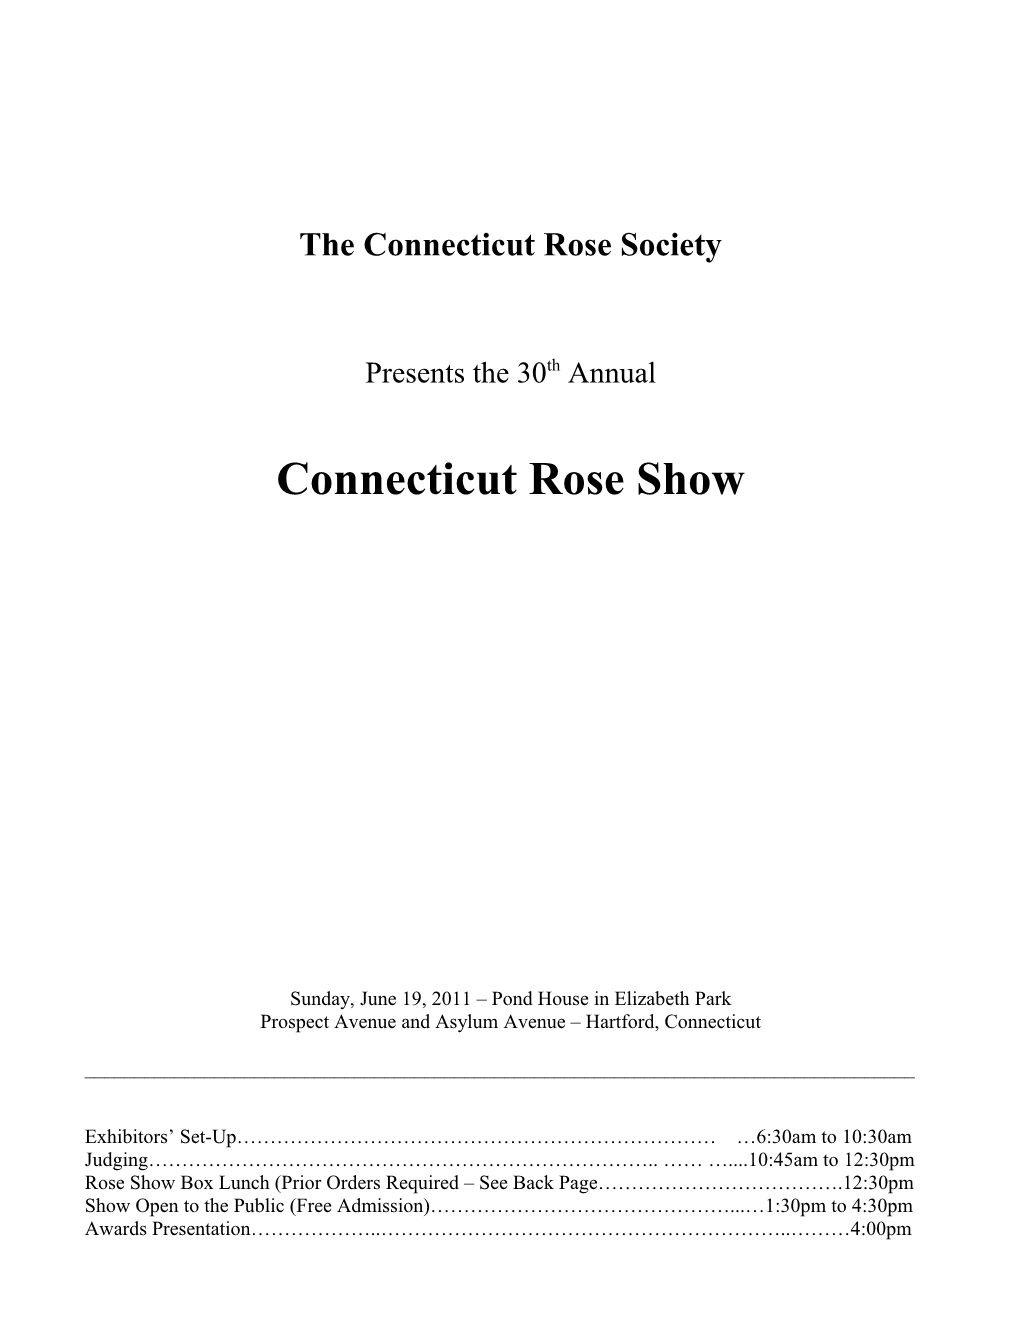 The Connecticut Rose Society